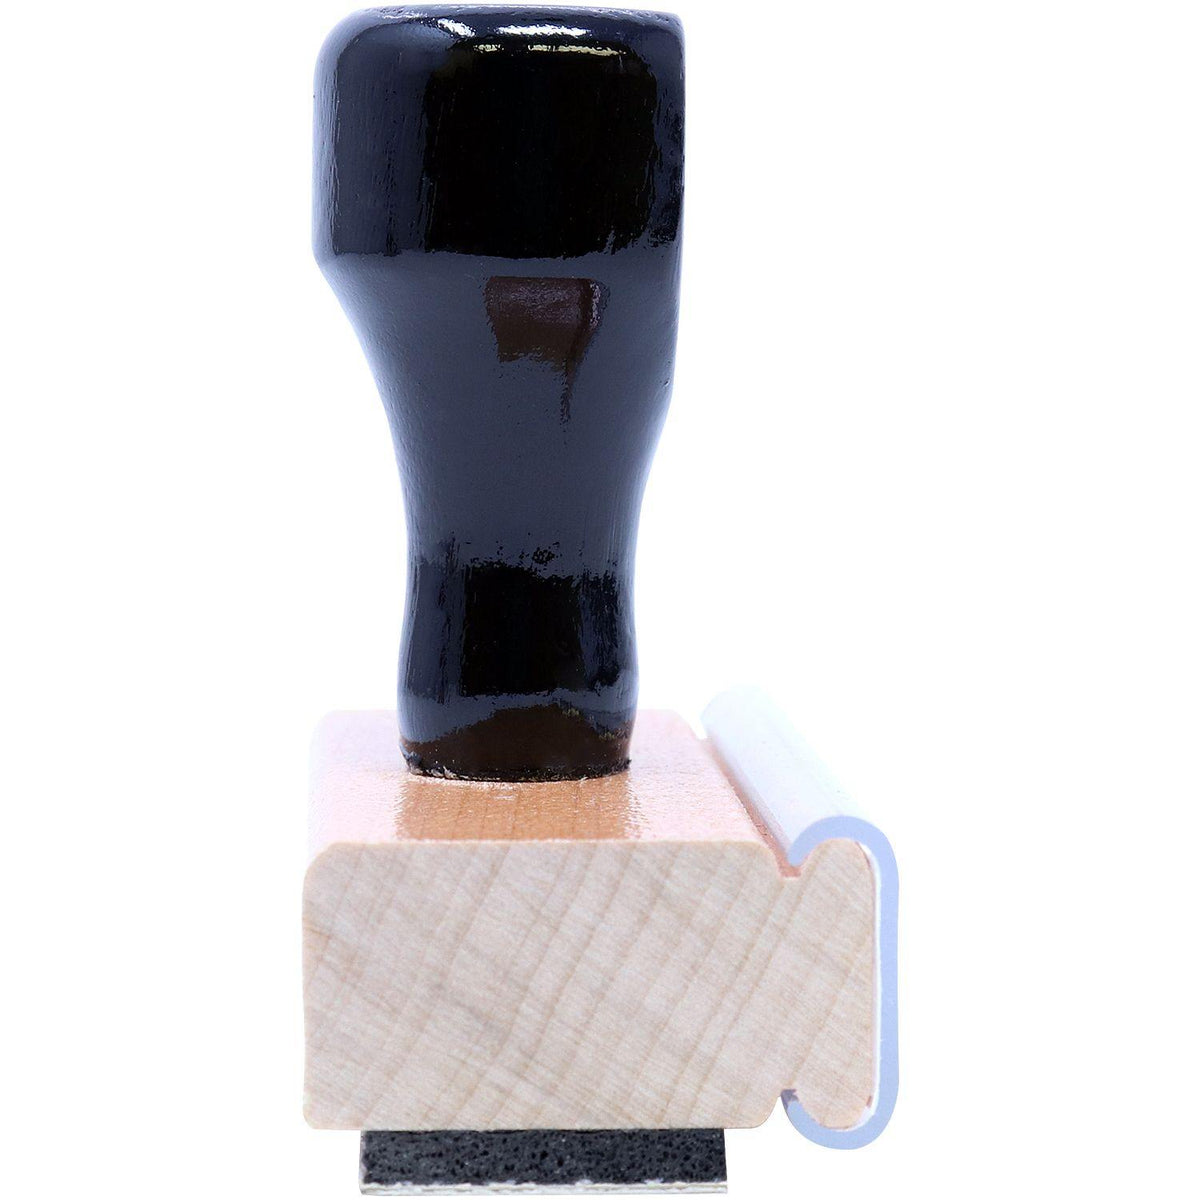 Side View of Large No Negociable Rubber Stamp